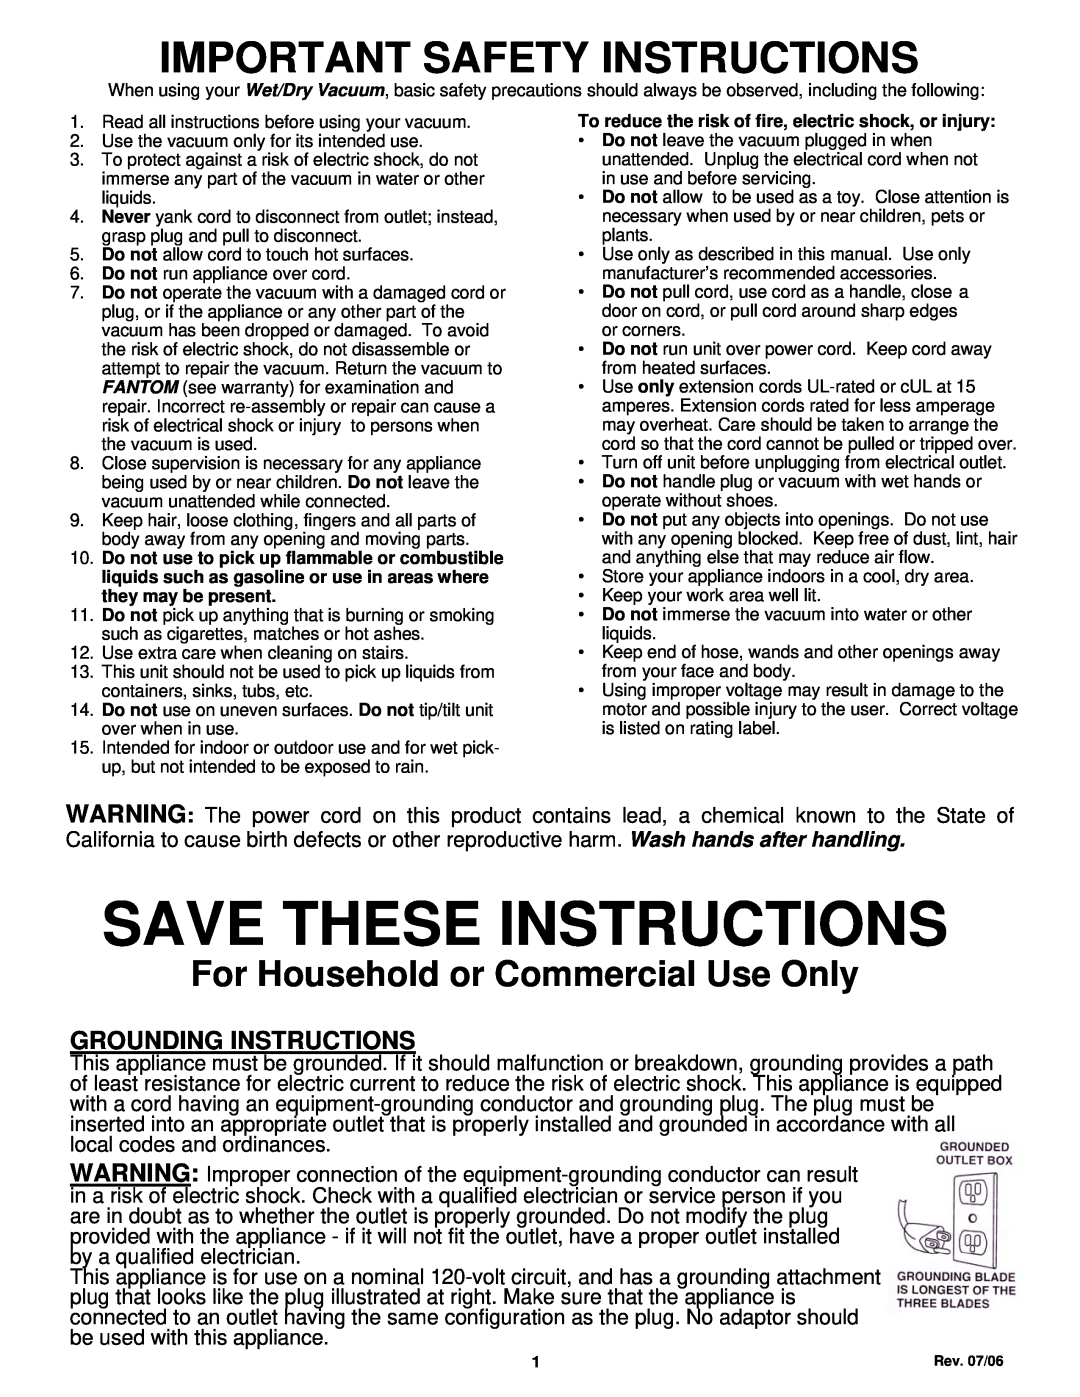 Fantom Vacuum CW233H owner manual Grounding Instructions, Save These Instructions, Important Safety Instructions 